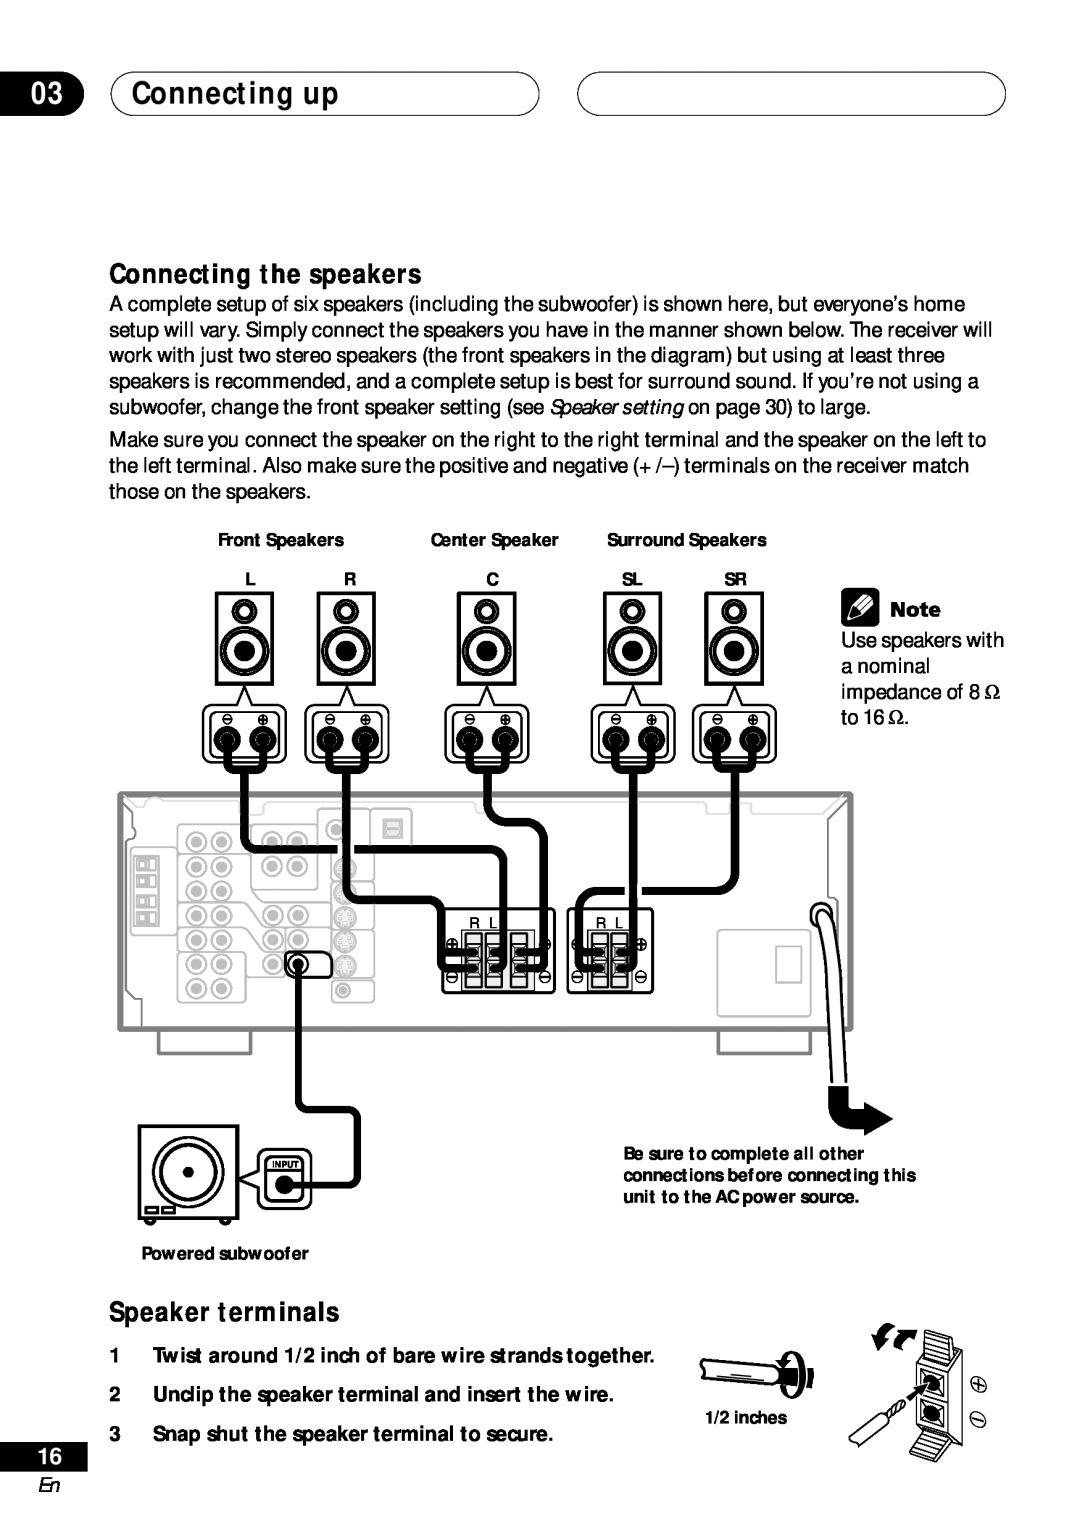 Pioneer VSX-D41 manual Connecting the speakers, Speaker terminals, Connecting up, Snap shut the speaker terminal to secure 